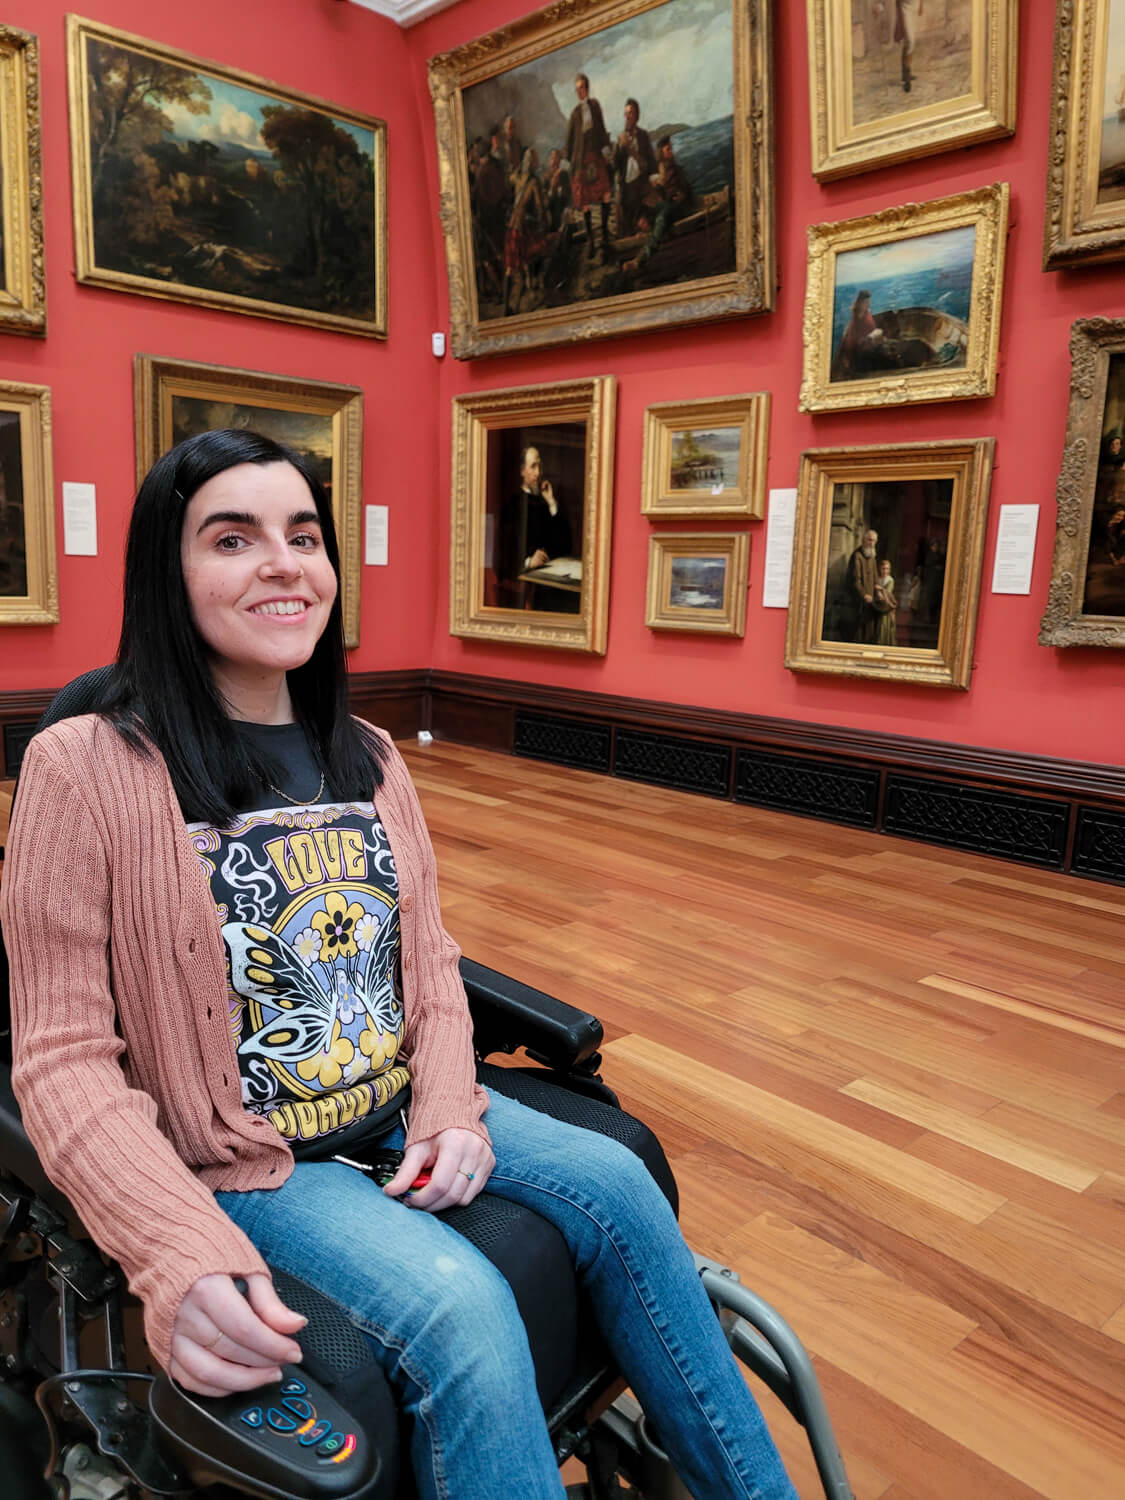 Emma sat in her wheelchair inside The Victoria Gallery at The McManus